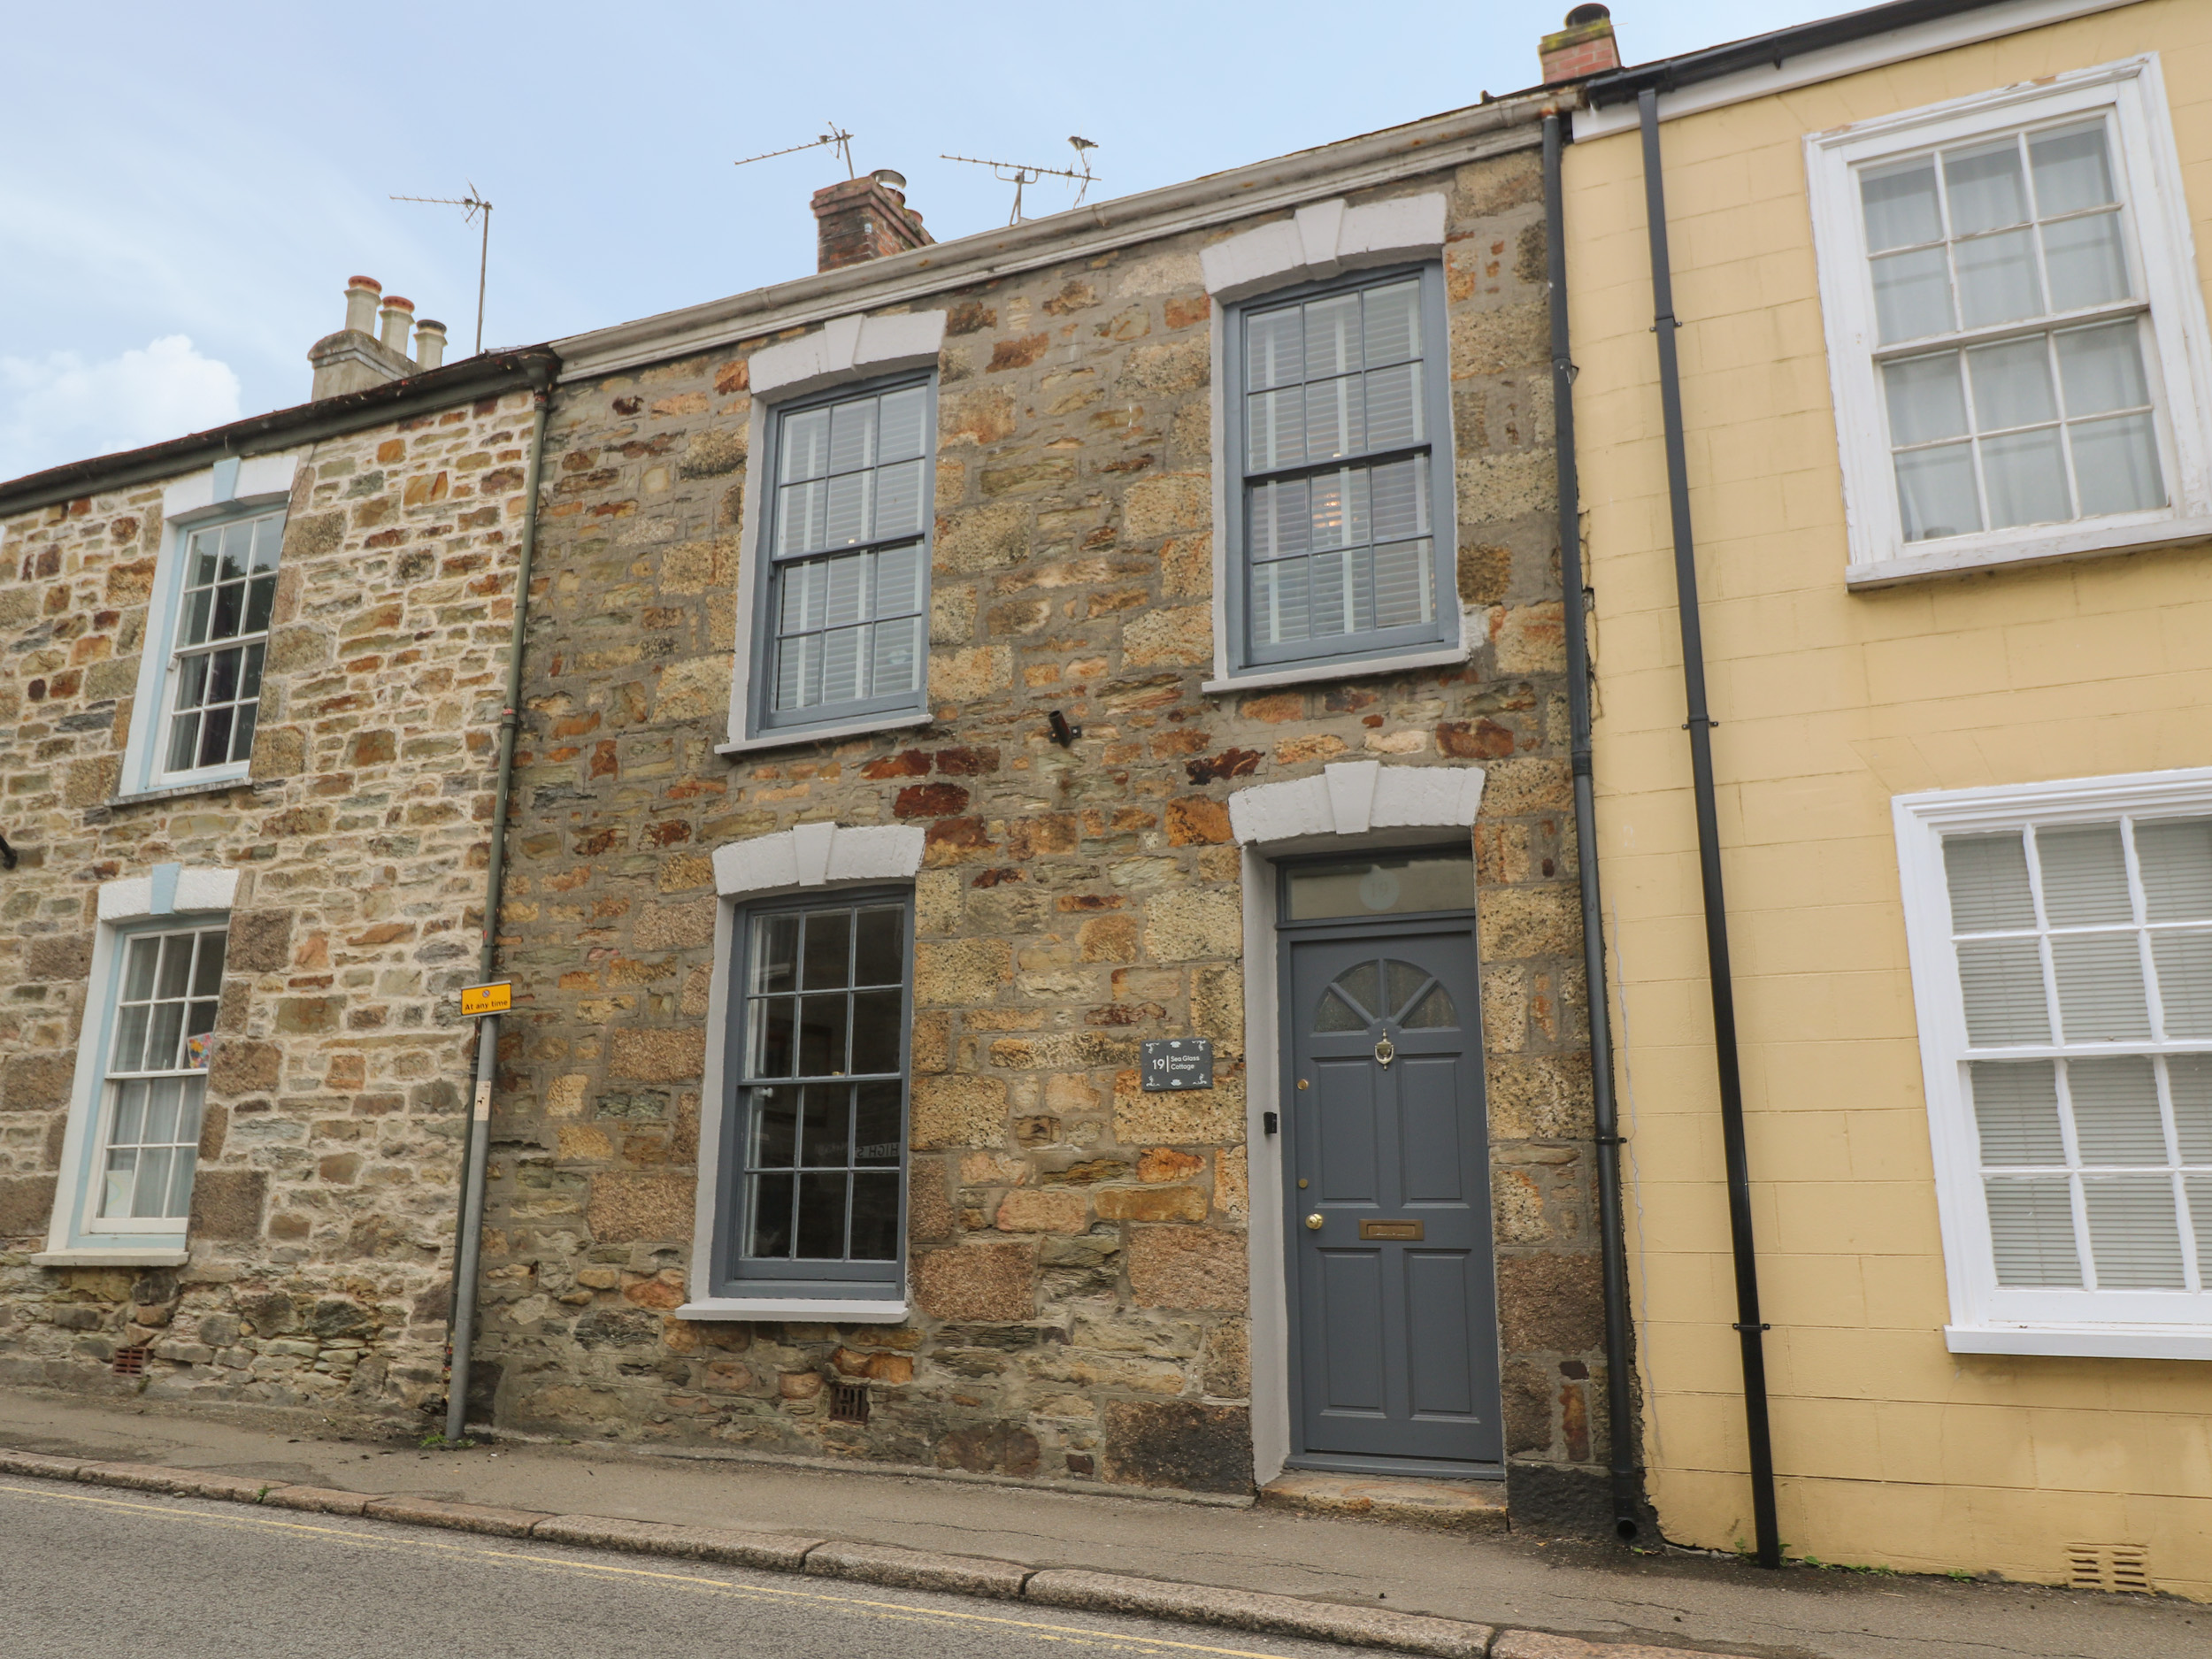 3 bedroom Cottage for rent in Truro